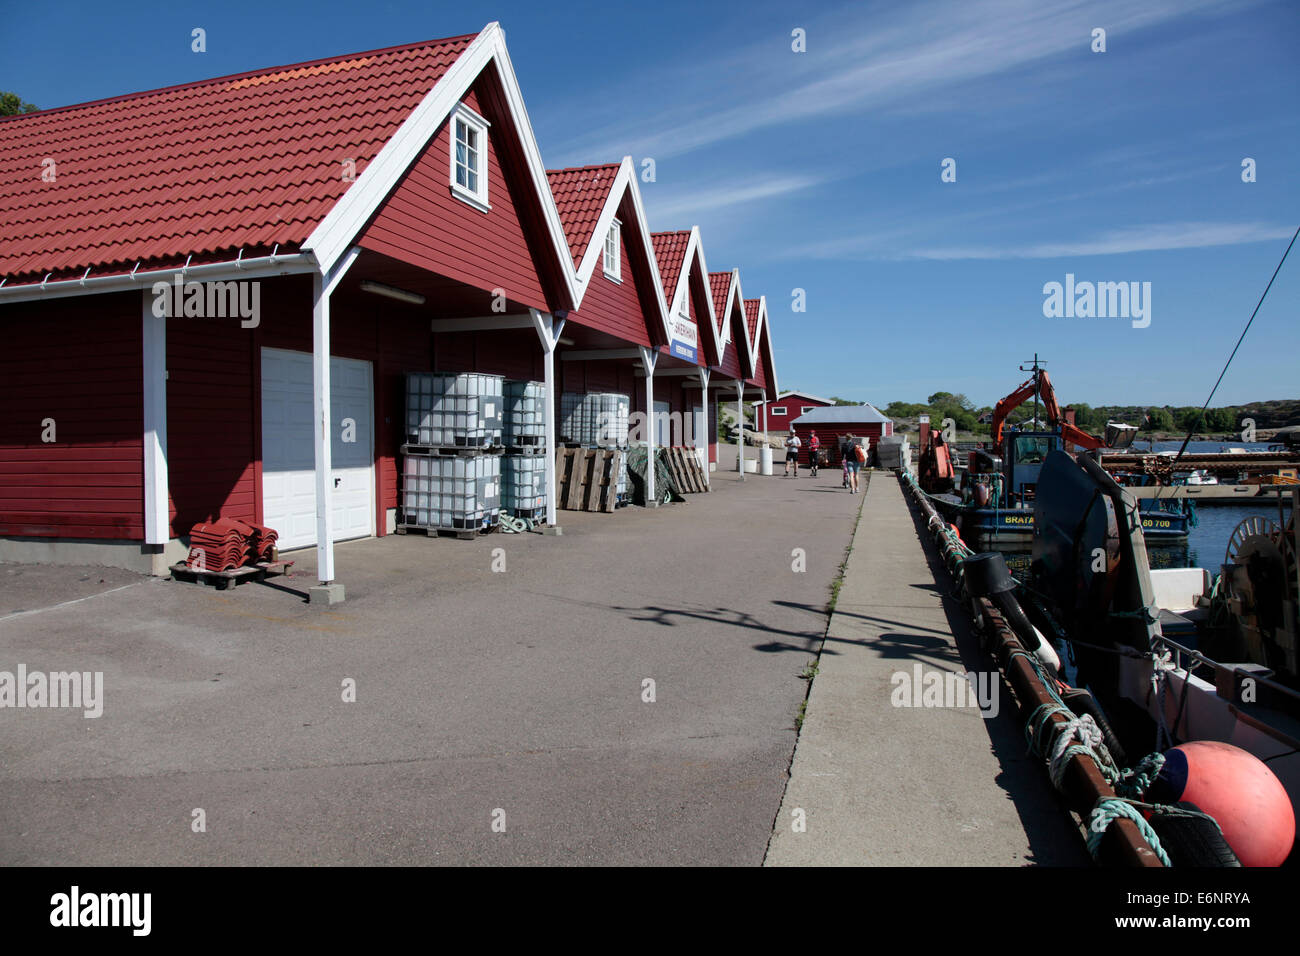 Fishing port and marina at Verdens Ende. The Norwegian end of the world - or 'Verdens Ende' - is located in the Oslo fjord. Photo: Klaus Nowottnick Date: June 8, 2014 Stock Photo